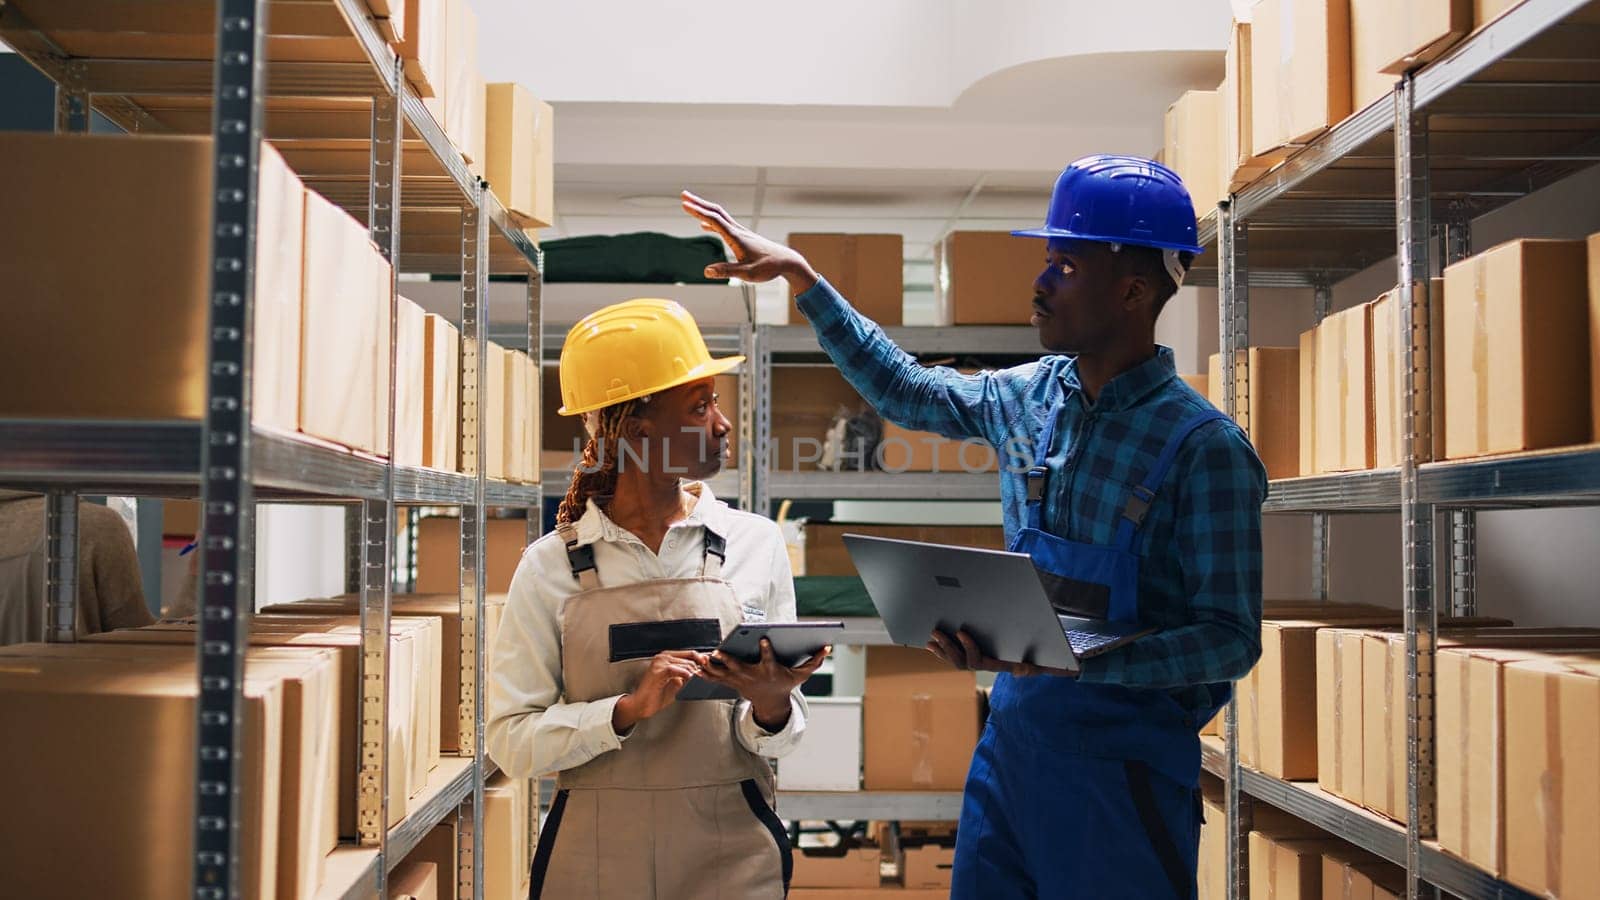 Man and woman organizing products on racks and shelves, looking at merchandise stock on laptop and tablet. Team of workers with overalls arranging goods in storage room, order shipment.